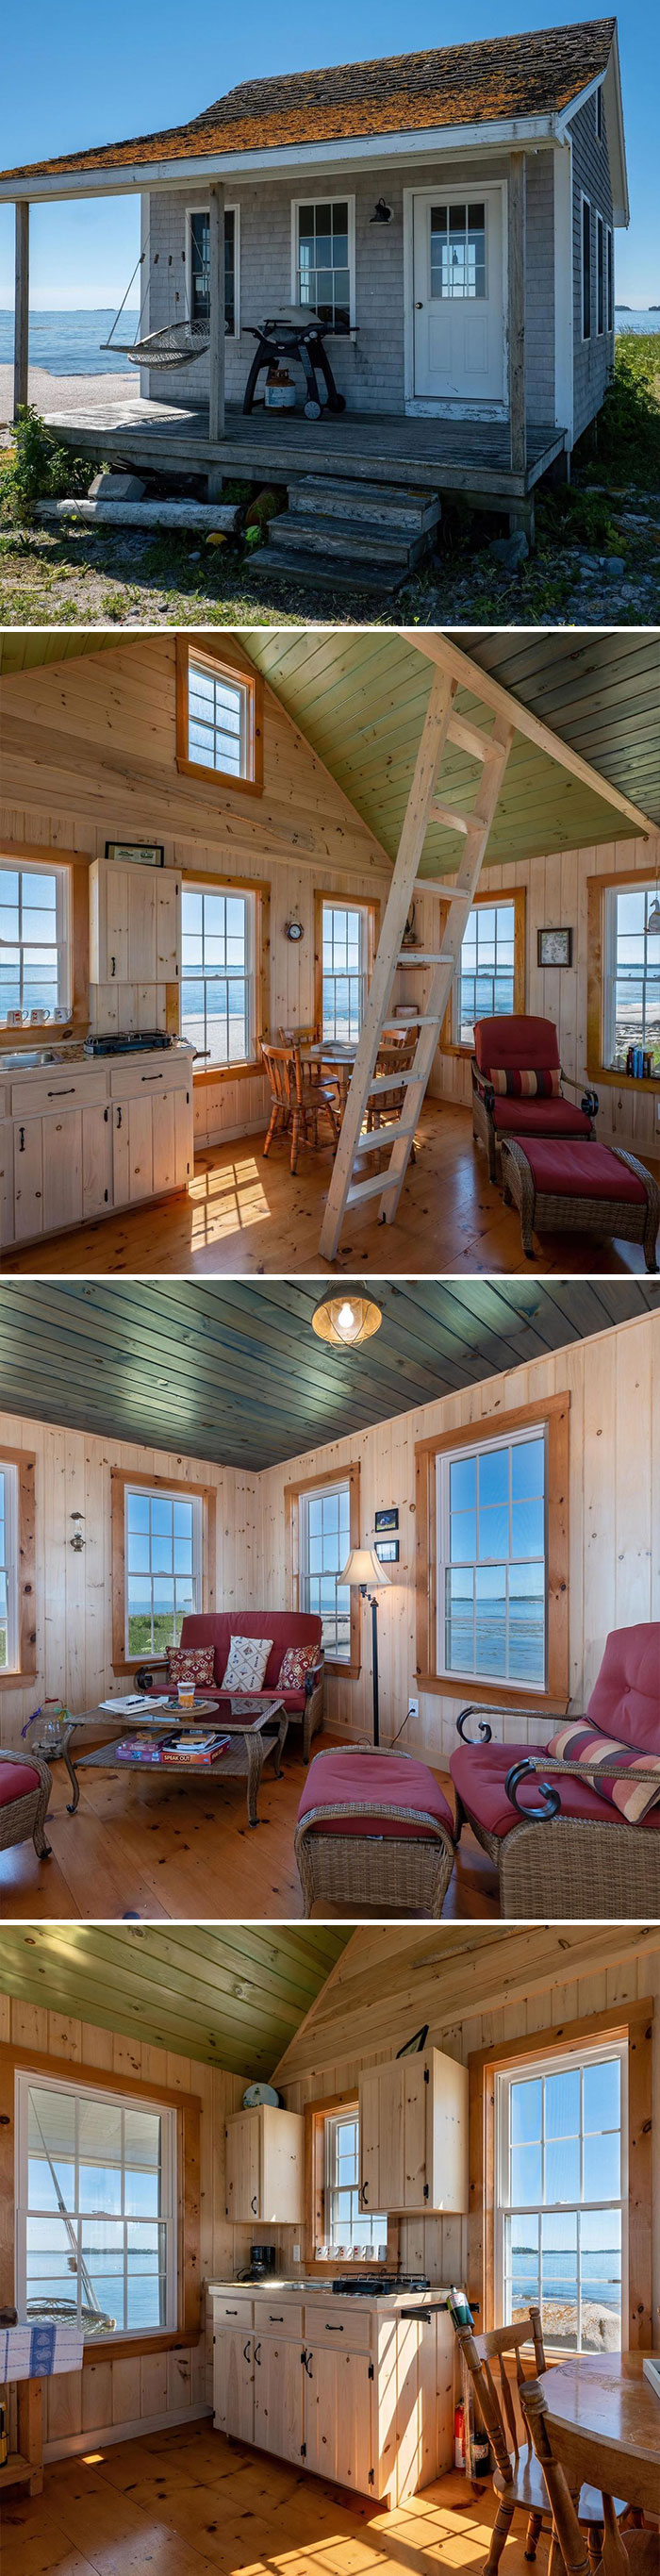 Here’s Your Chance To Finally Own Your Own Island In Addison, Me For $339,000. Per The Listing The “Ledges Surrounding The Island Are Loaded With Seals For Constant Entertainment”. 1 Bed. 540 Sq Ft. 1.5 Acres